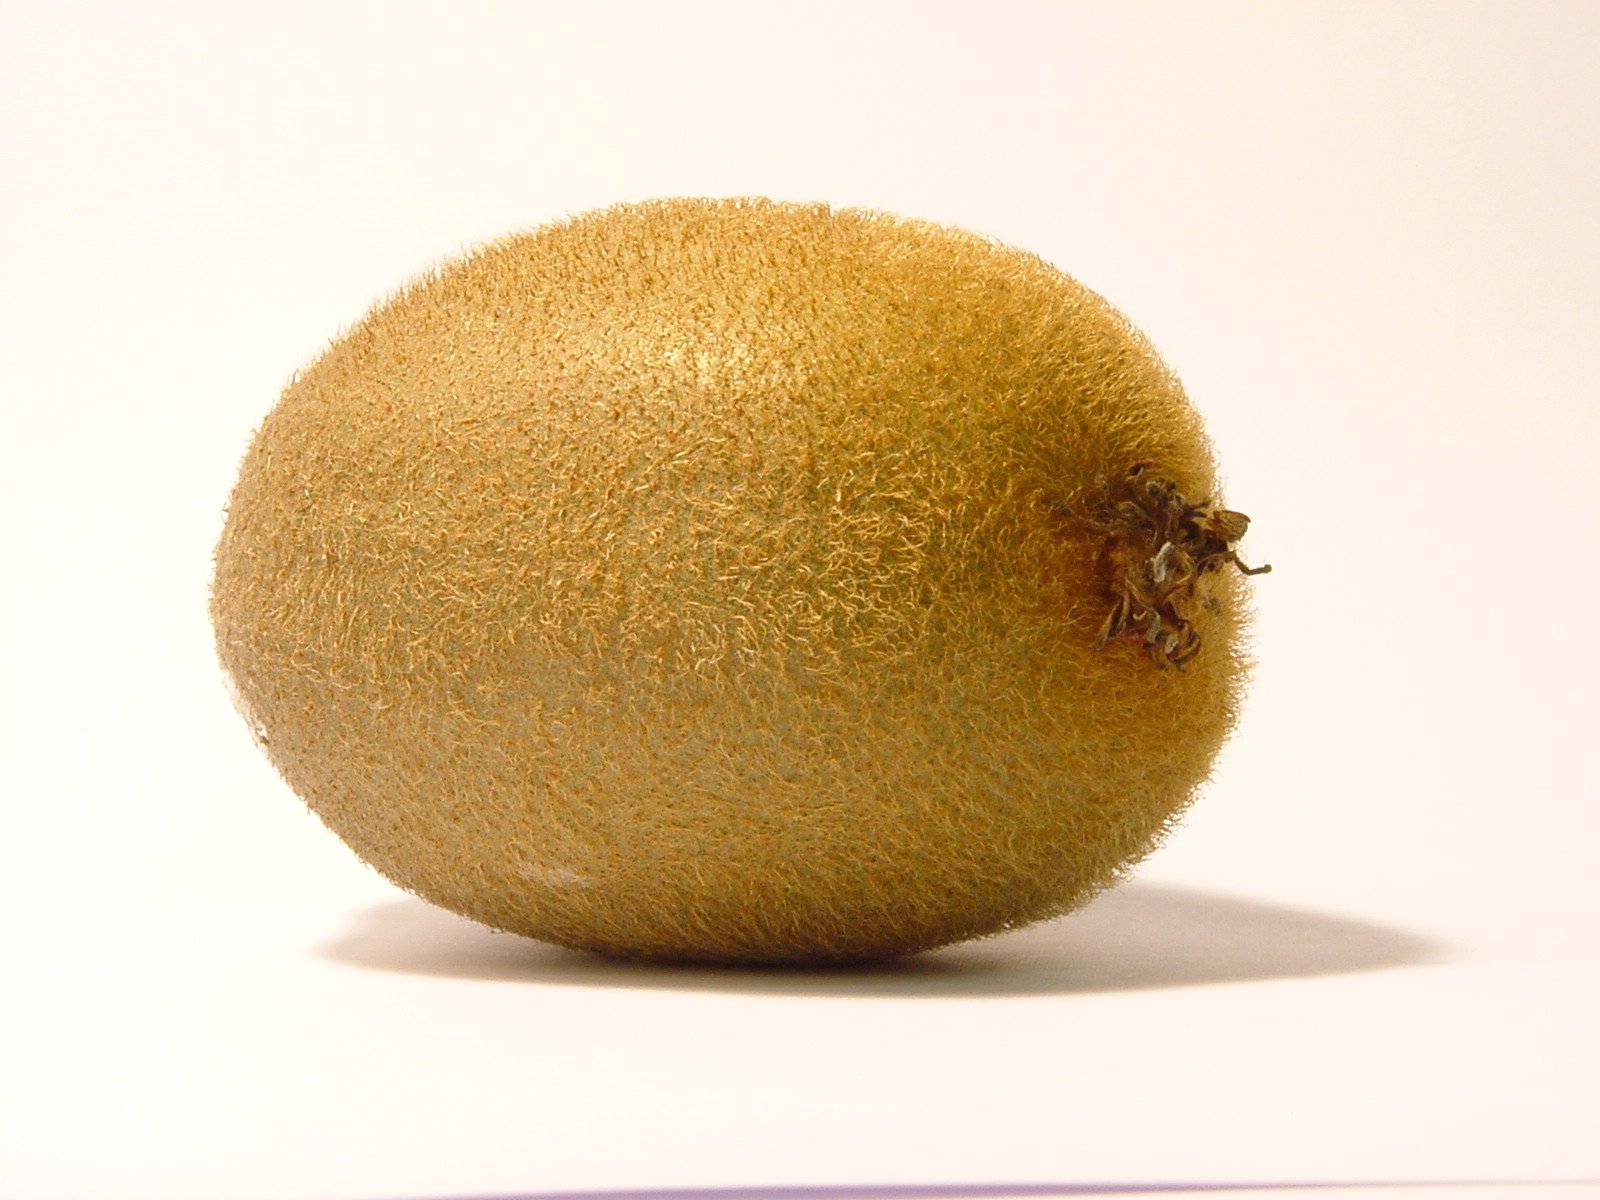 a large ripe mango with a bee in it